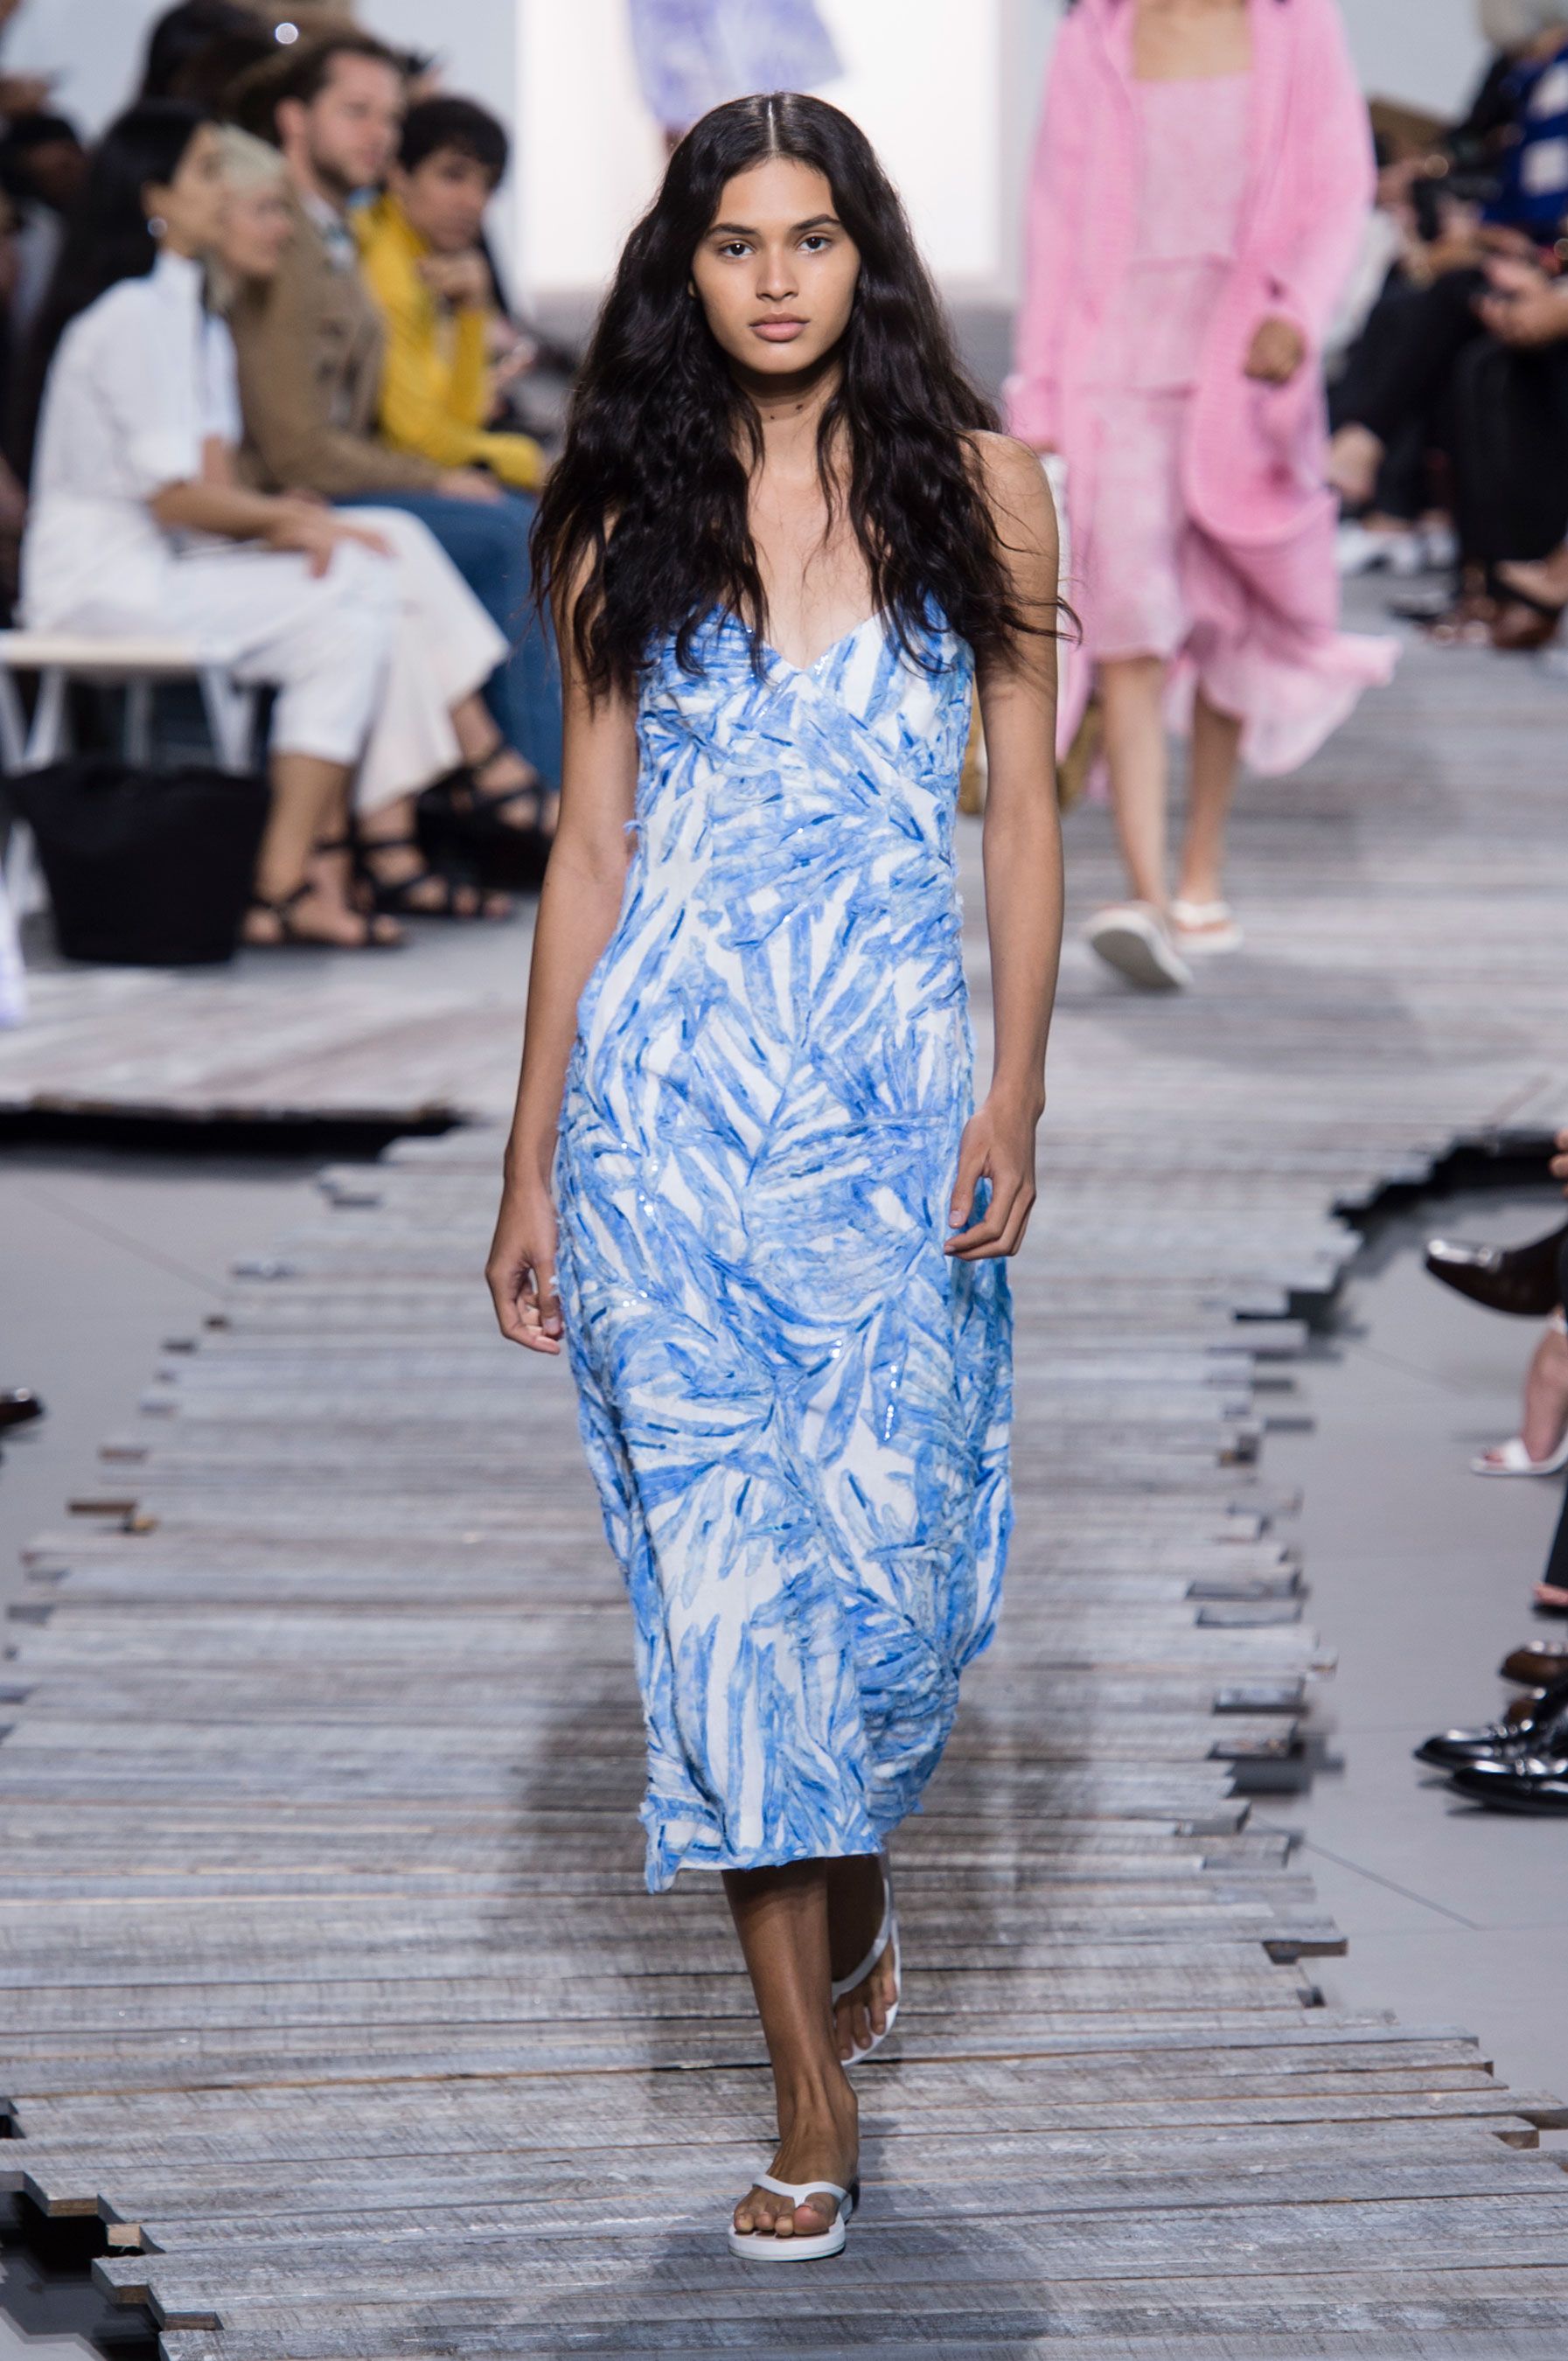 Michael Kors SS18 Runway Show - Michael Collection Fashion Week Spring 2018